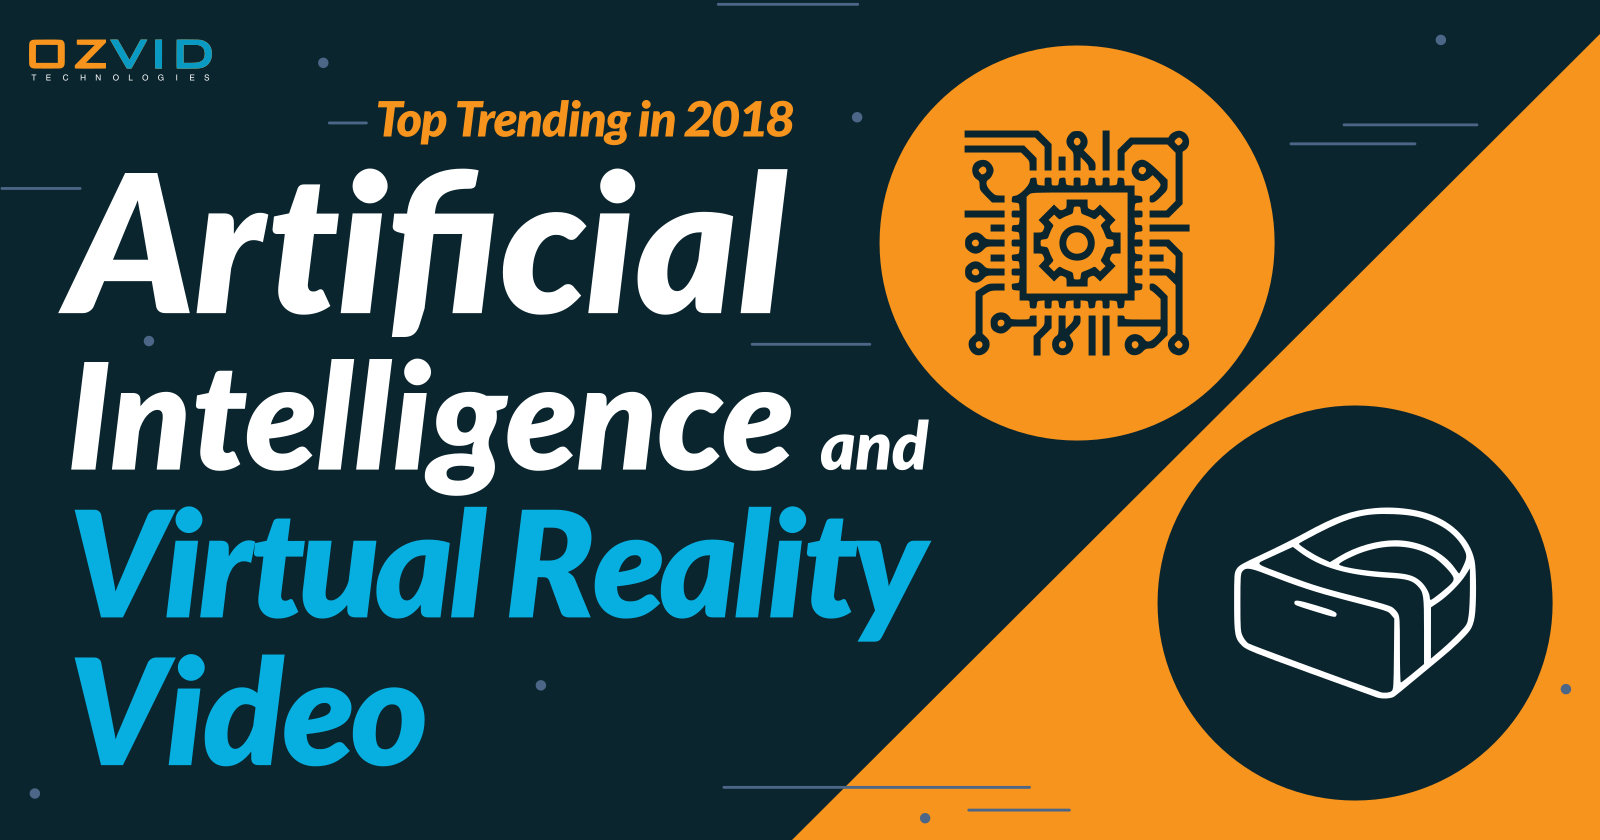 Artificial Intelligence and Virtual Reality Video: Top Trending in 2018